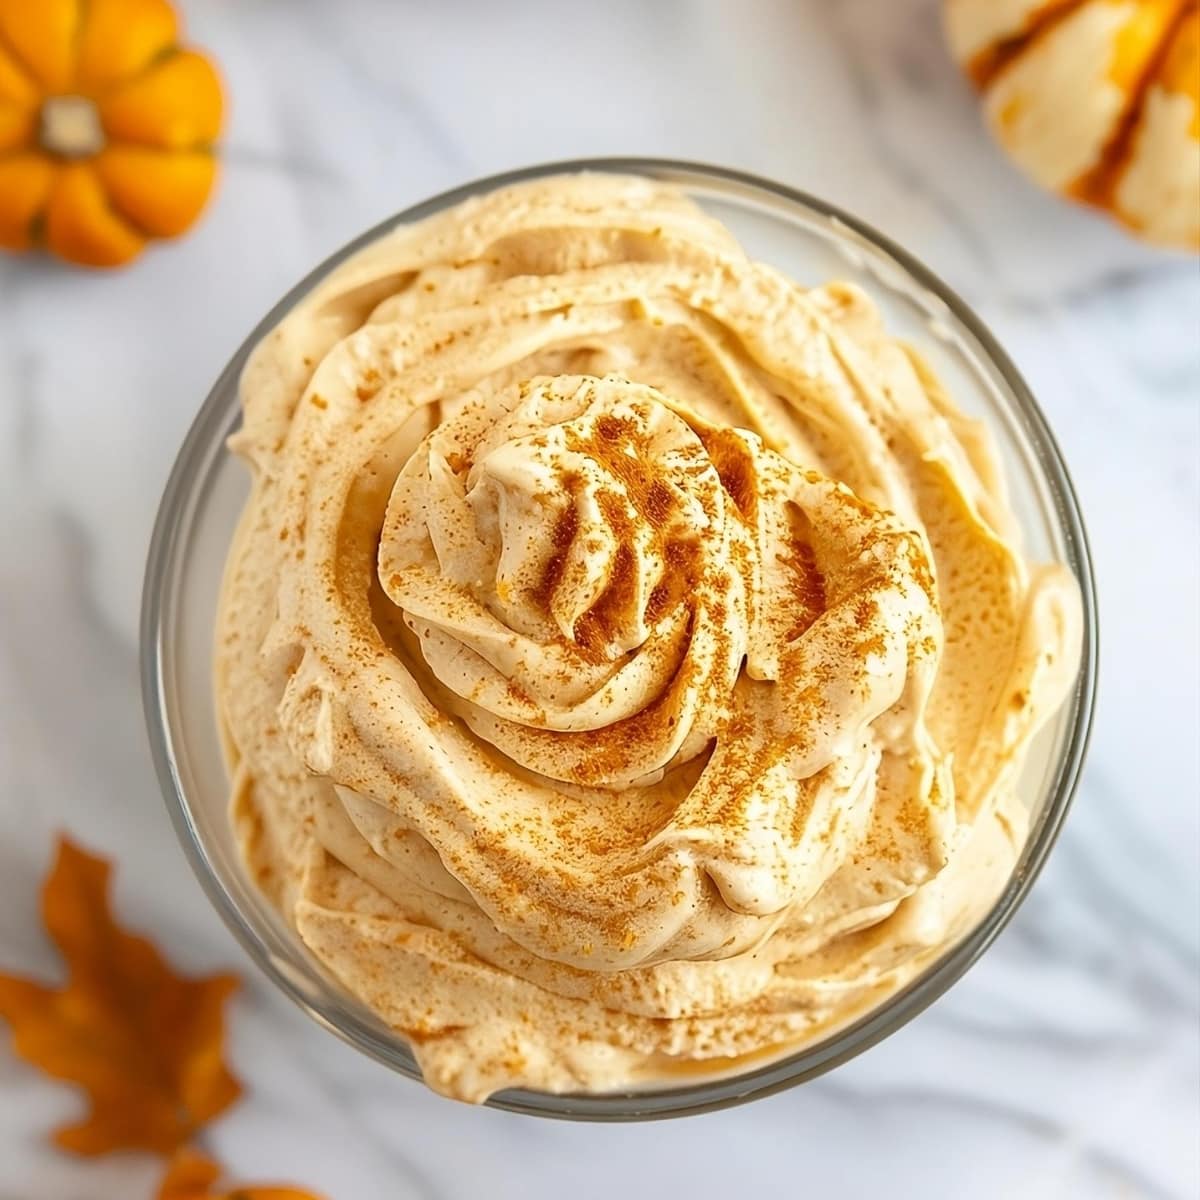 Top view of pumpkin whipped cream sprinkled with pumpkin spice served in a glass bowl.